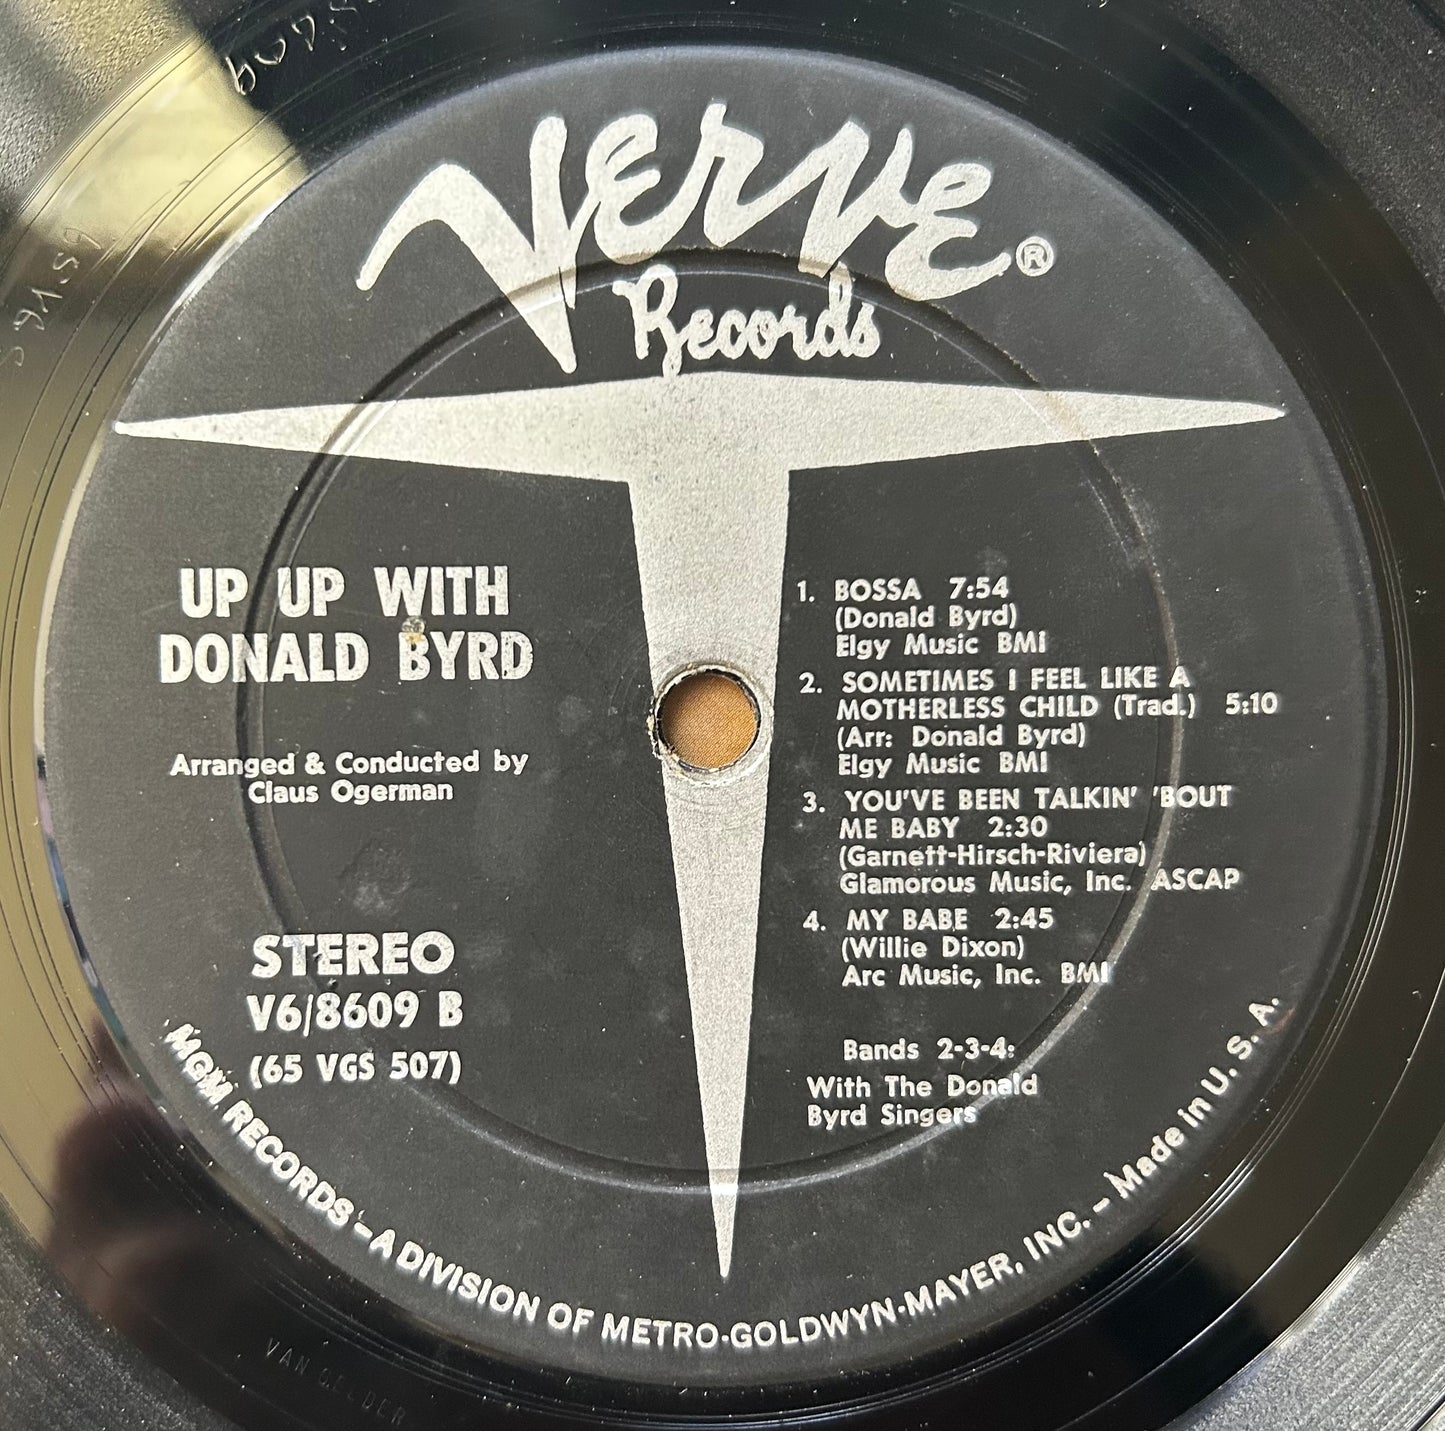 Donald Byrd - Up With Donald Byrd 1965 Verve Stereo Press